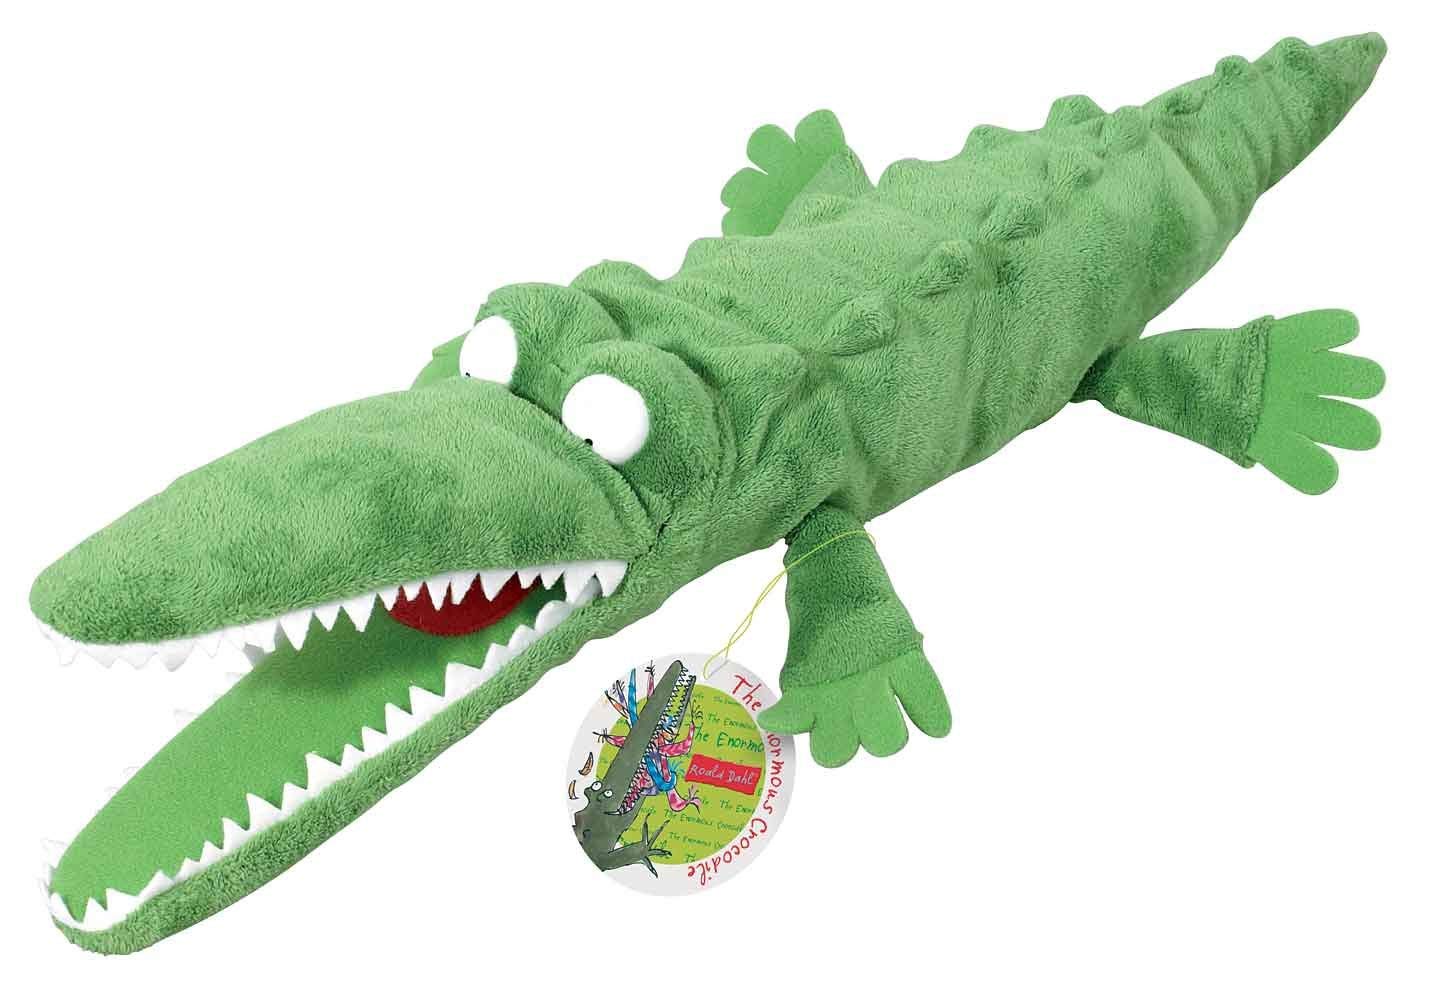 The Enormous Crocodile soft toy - one of the best Roald Dahl gifts for children - The Little Adventurer